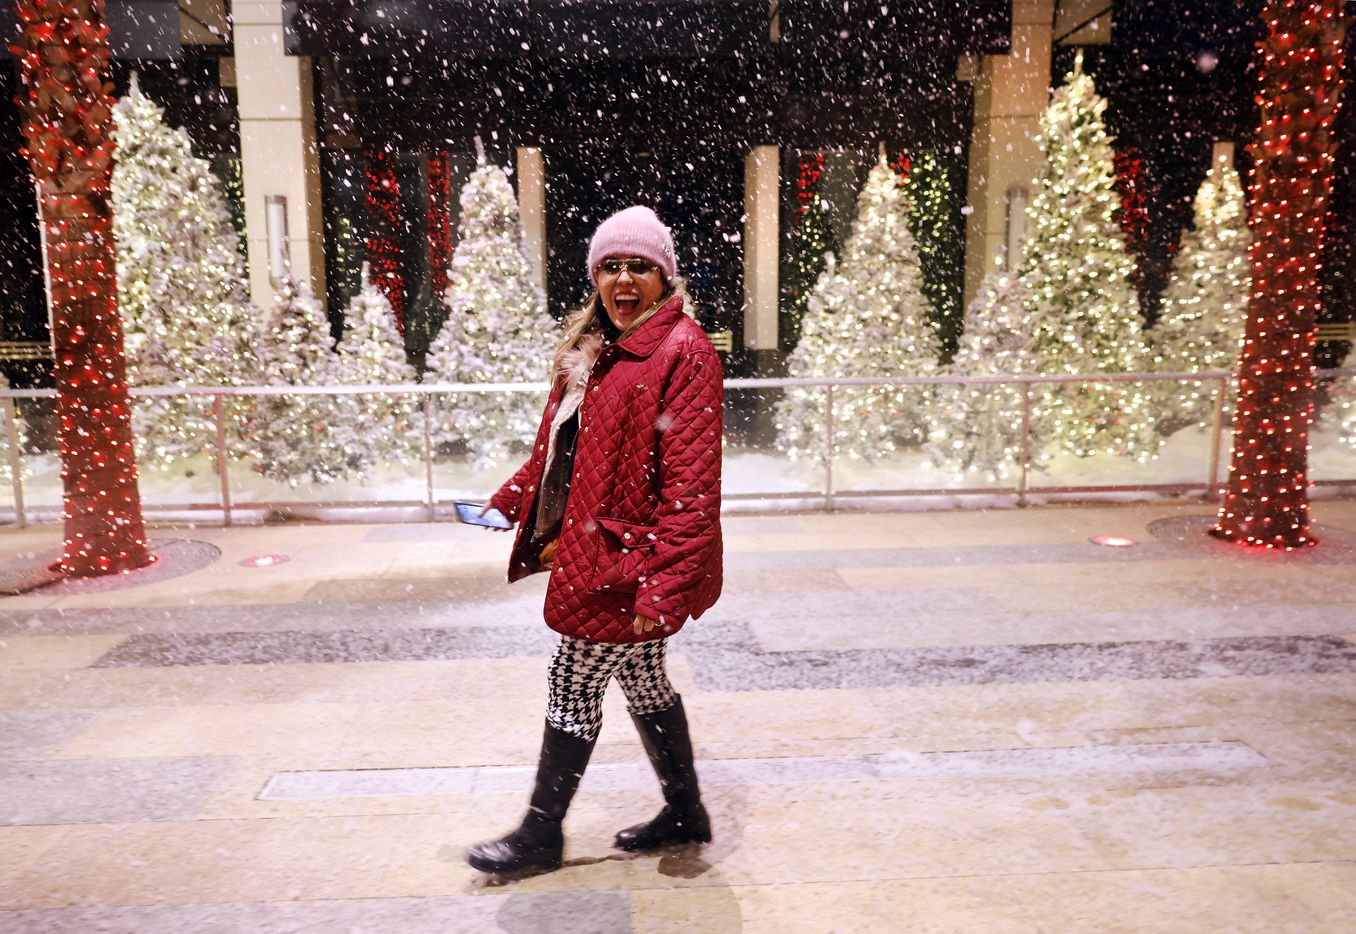 Sylvia Diaz of El Paso was excited about the artificial snow falling as she entered Galleria...